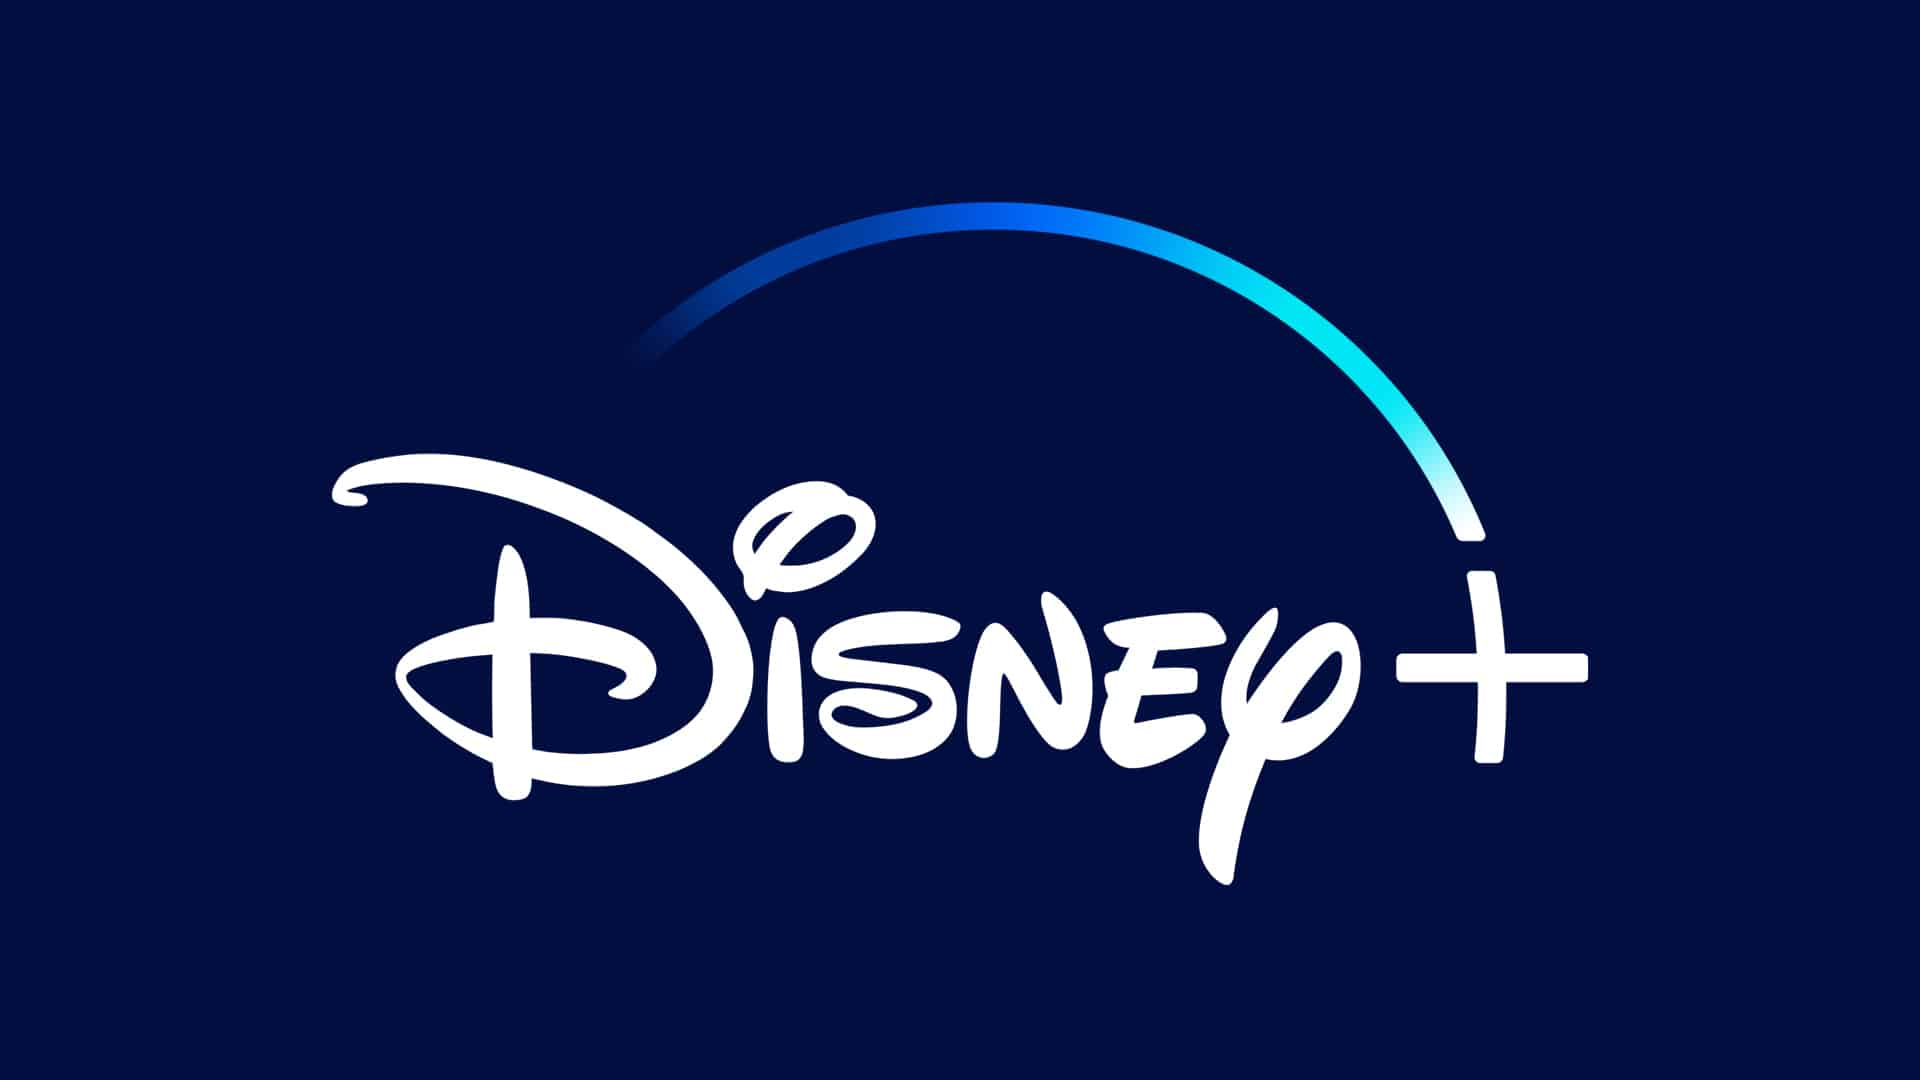 South Africans Can Now Register For Disney+ and Save on an Annual Subscription